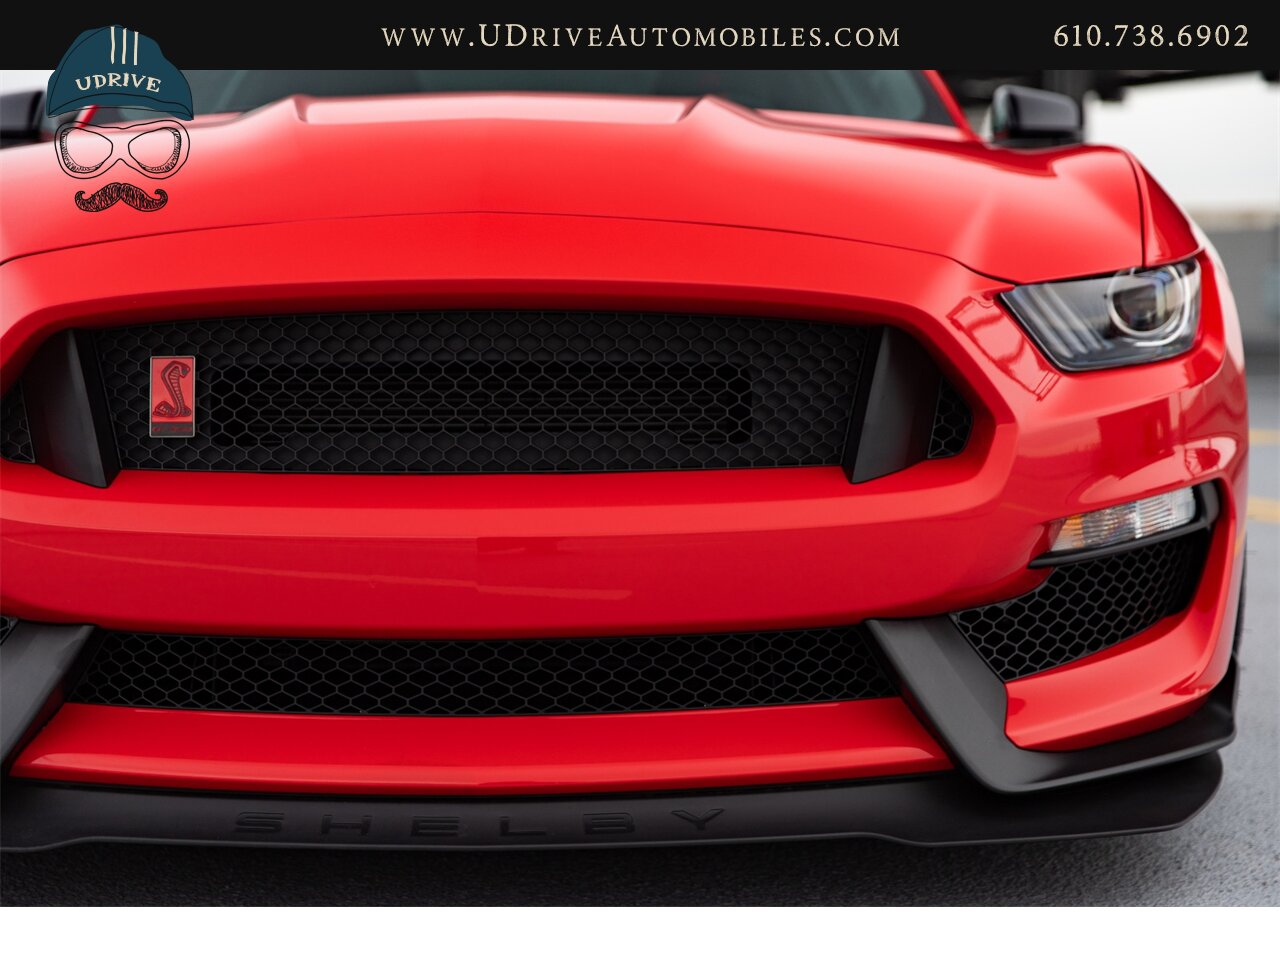 2016 Ford Mustang Shelby GT350R 3k Miles Electronics Pkg  1 of 32 Race Red Produced for USA As New - Photo 12 - West Chester, PA 19382